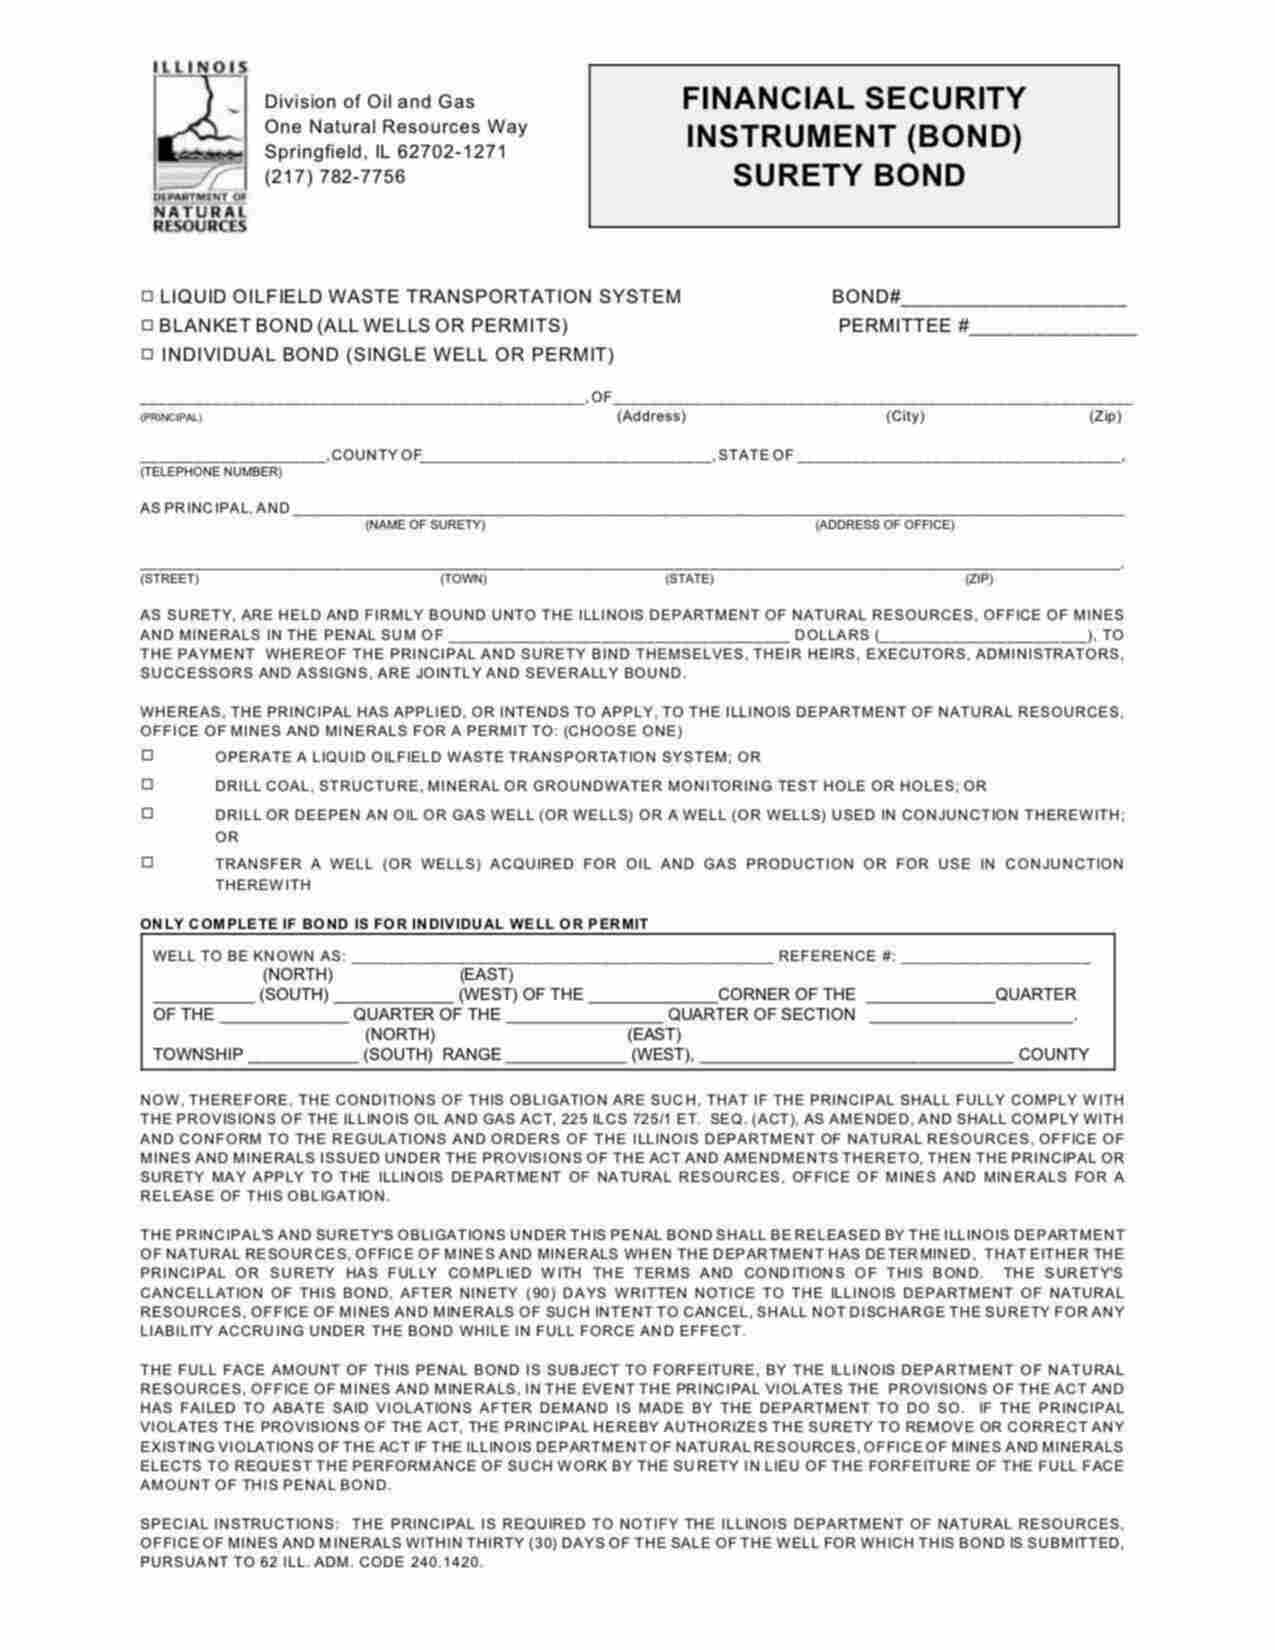 Illinois Blanket Transfer of Oil or Gas Wells Bond Form